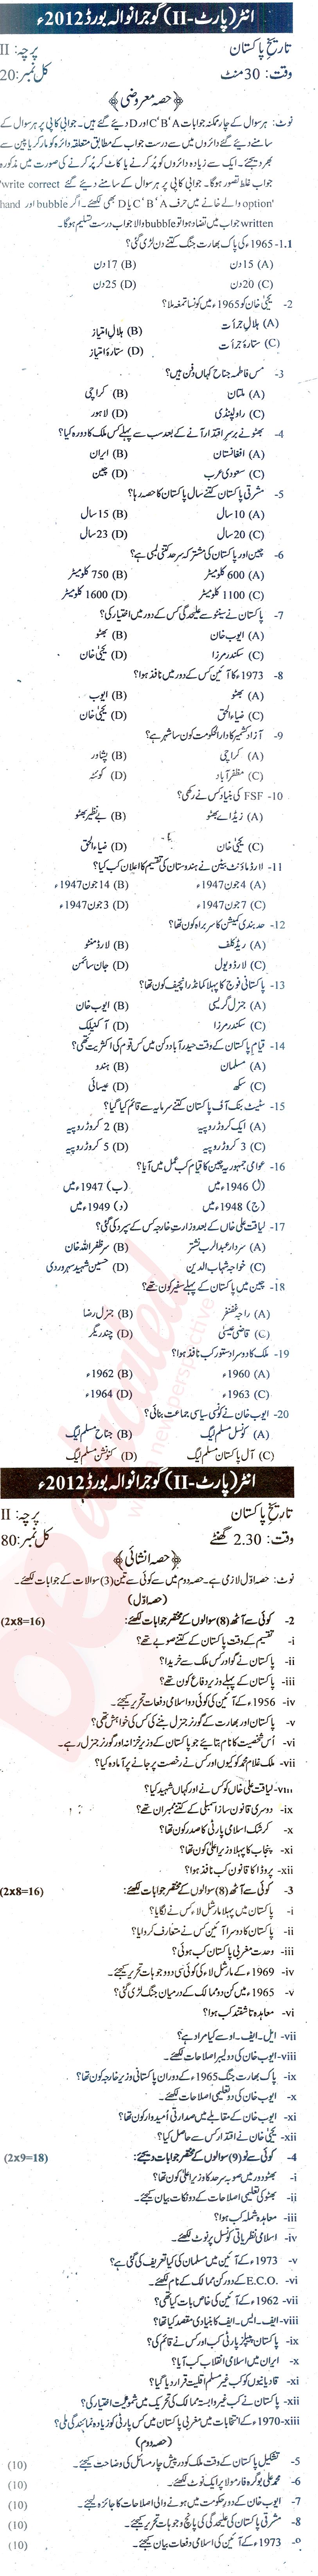 Pakistan History FA Part 2 Past Paper Group 1 BISE Gujranwala 2012